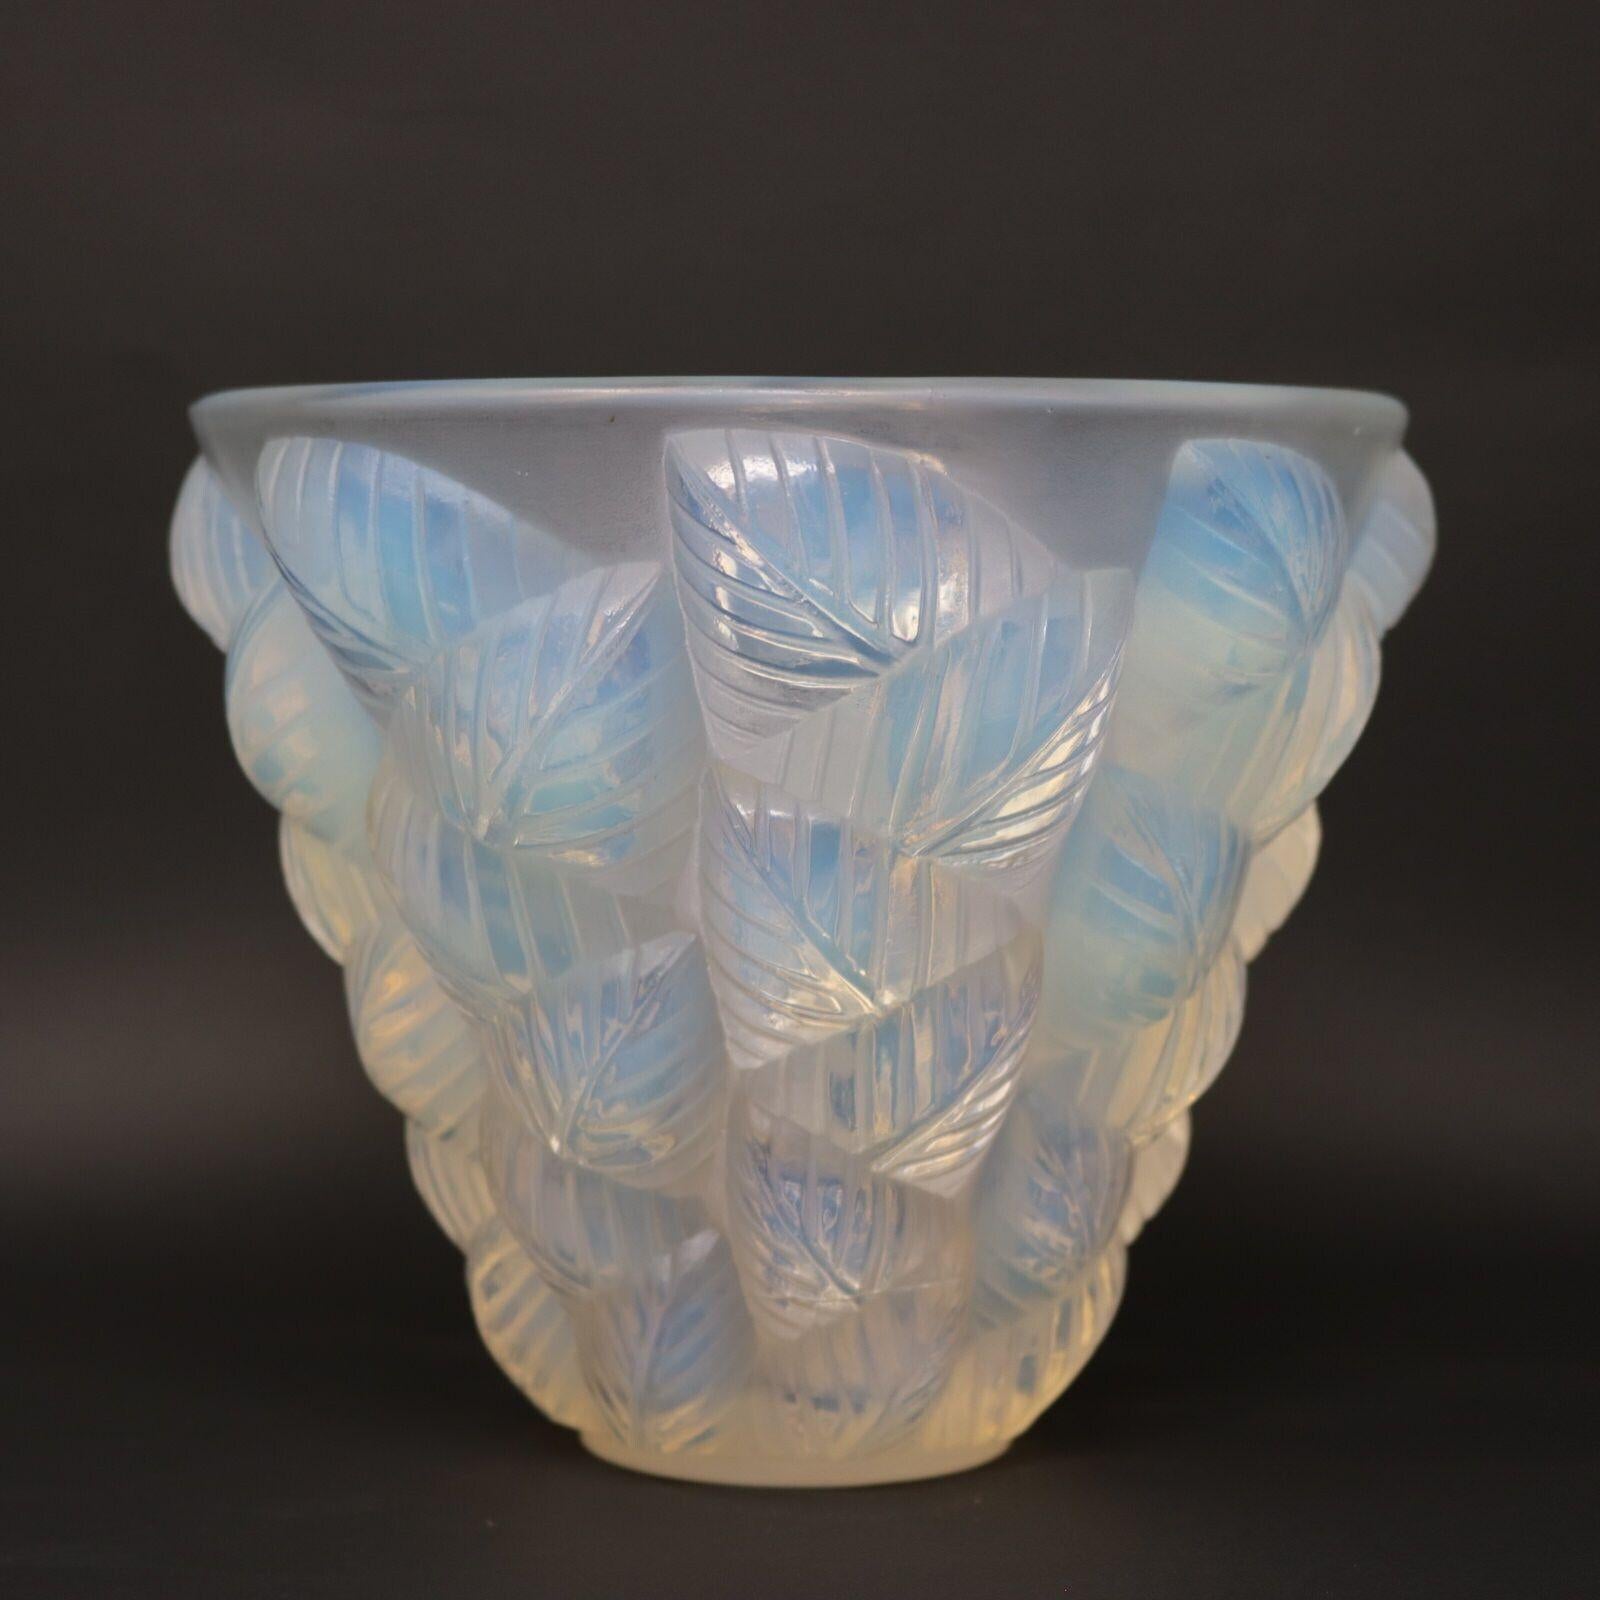 Rene Lalique Opalescent Glass 'Moissac' Vase. This pattern features deeply embossed leaves around the sides. Wheel cut makers mark, 'R LALIQUE FRANCE' to the underside. Book reference: 'R. LALIQUE Catalogue Raisonné De L'Oeuvre De Verre', by Felix